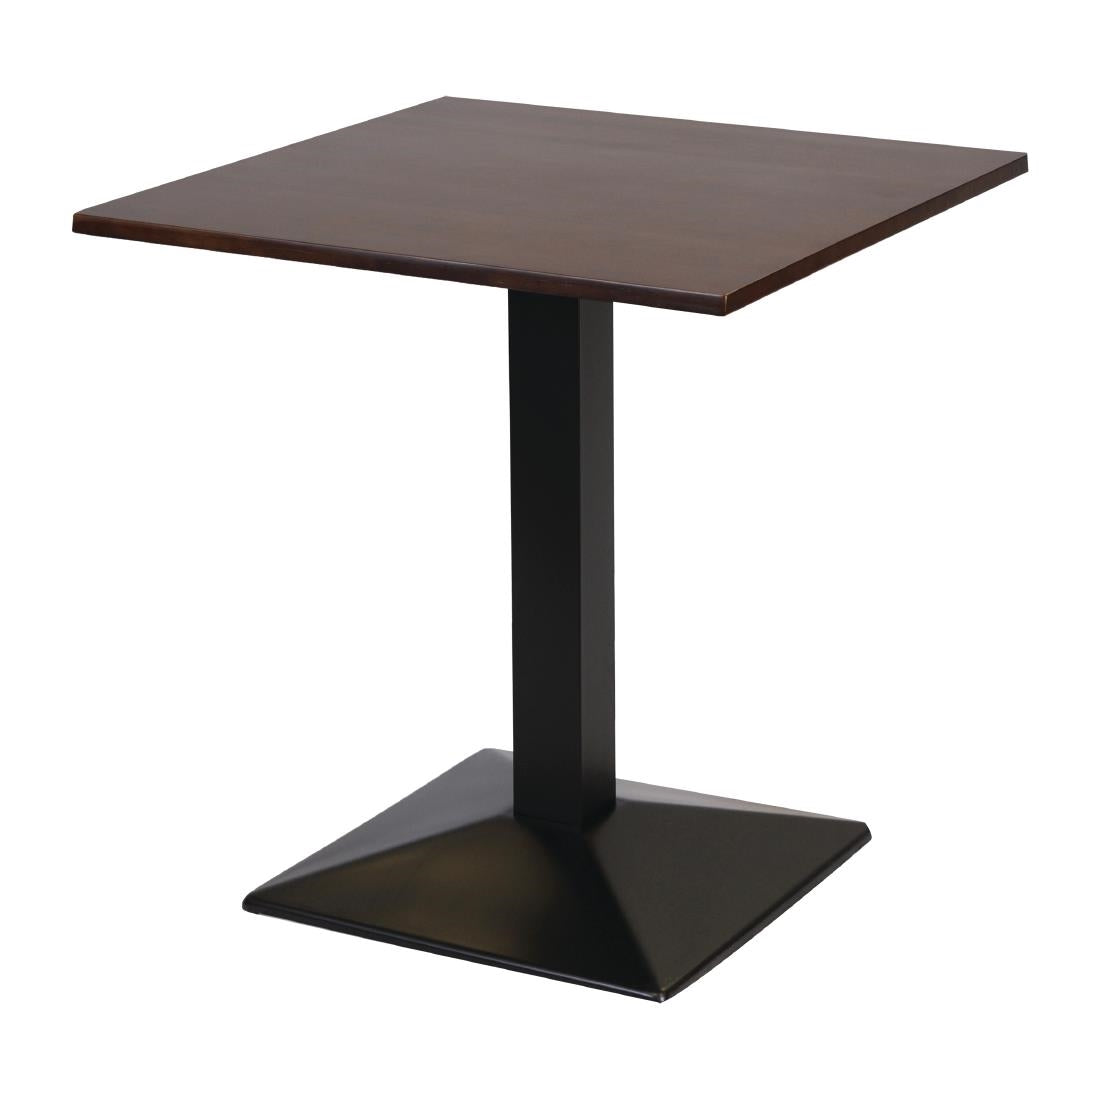 FT501 Turin Metal Base Pedestal Square Table with Dark Wood Top 700x700mm JD Catering Equipment Solutions Ltd